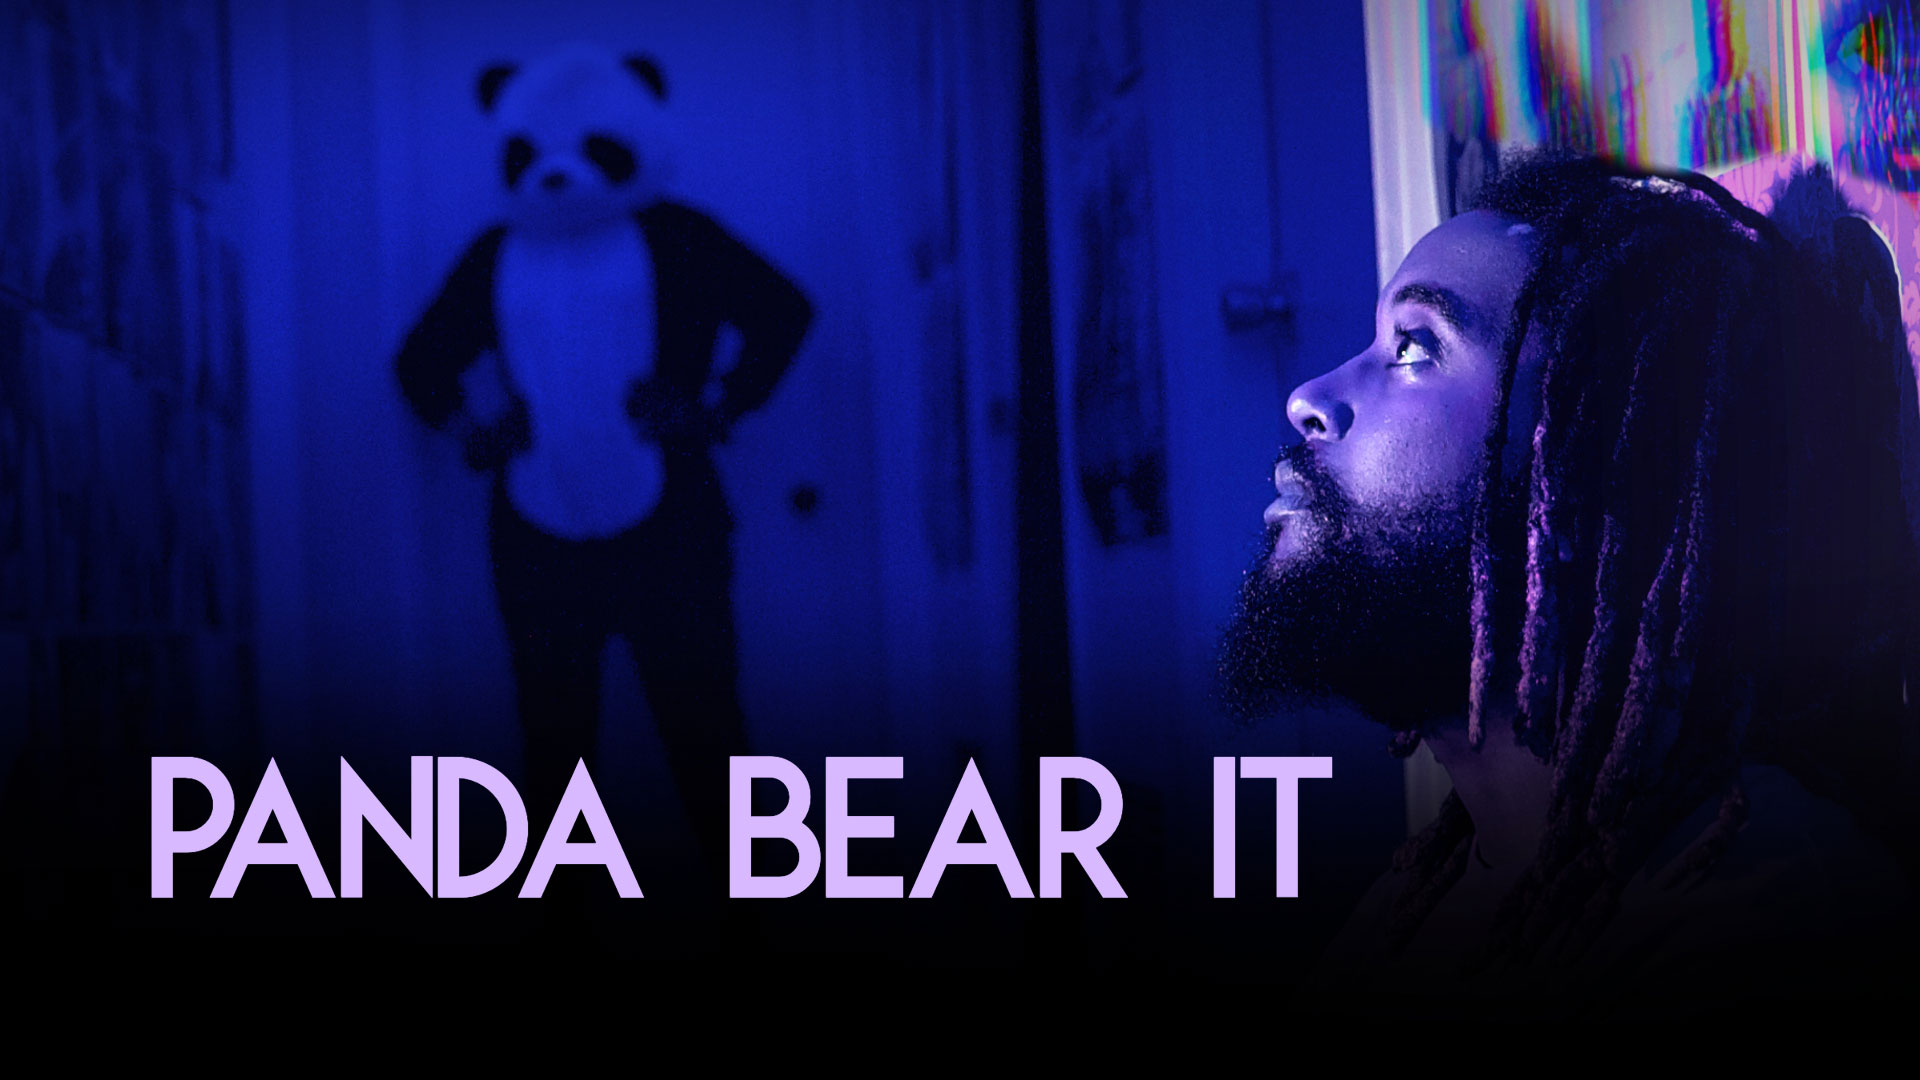 Panda Bear It – Evan Kidd Delivers a Surreal Slice of Life in his Latest Film thumbnail